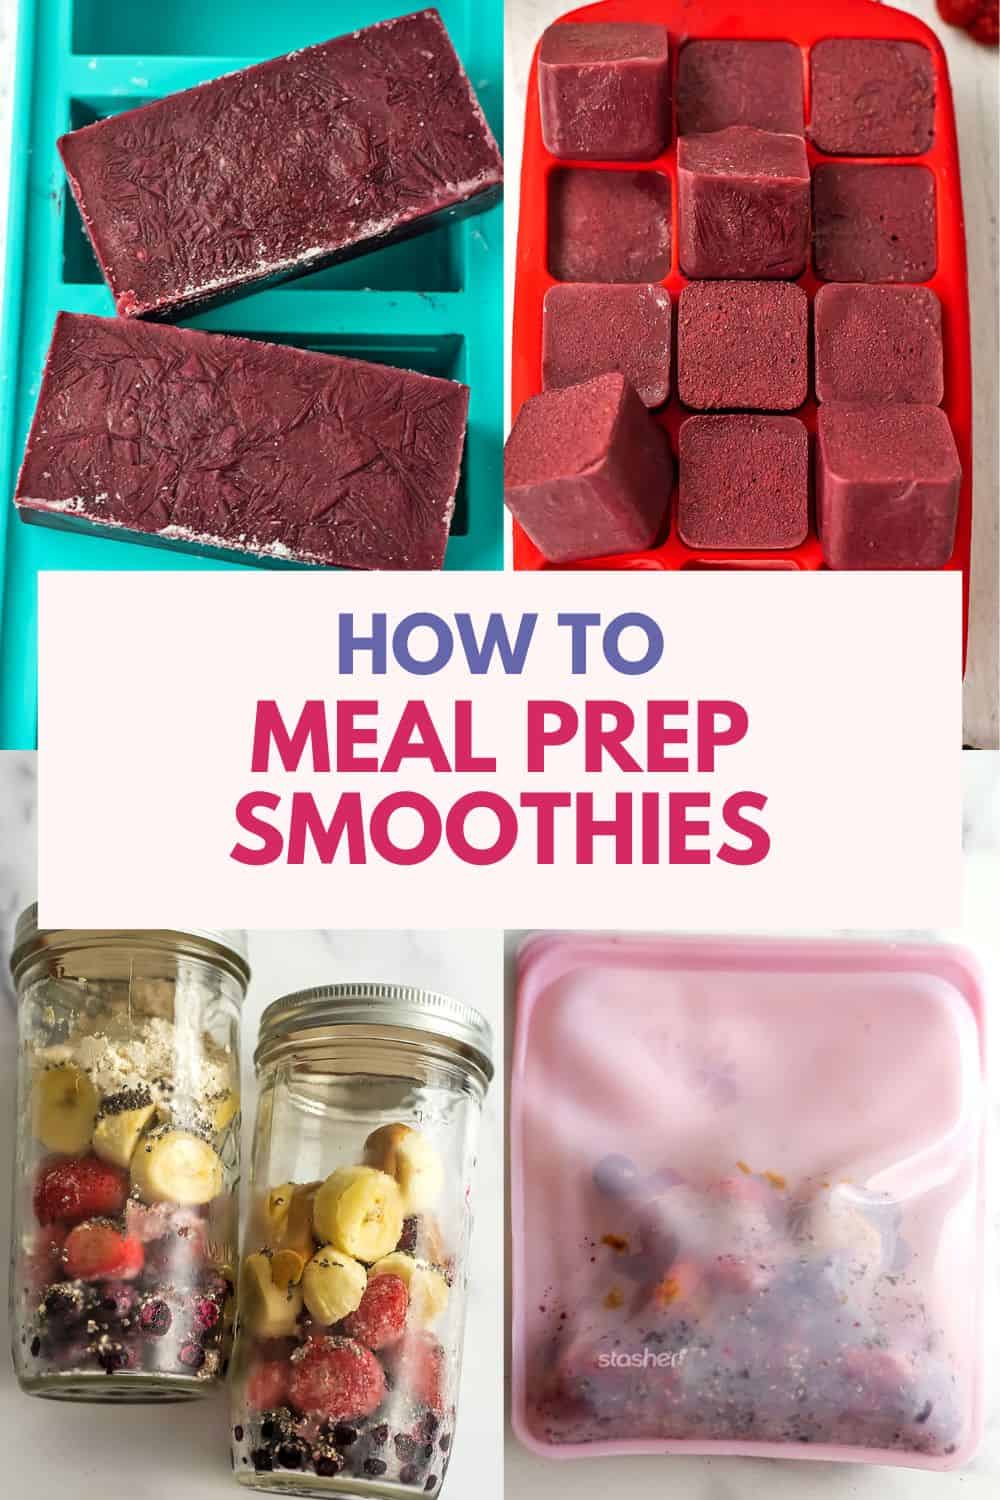 How to Meal Prep Smoothies for the Week - Bites of Wellness